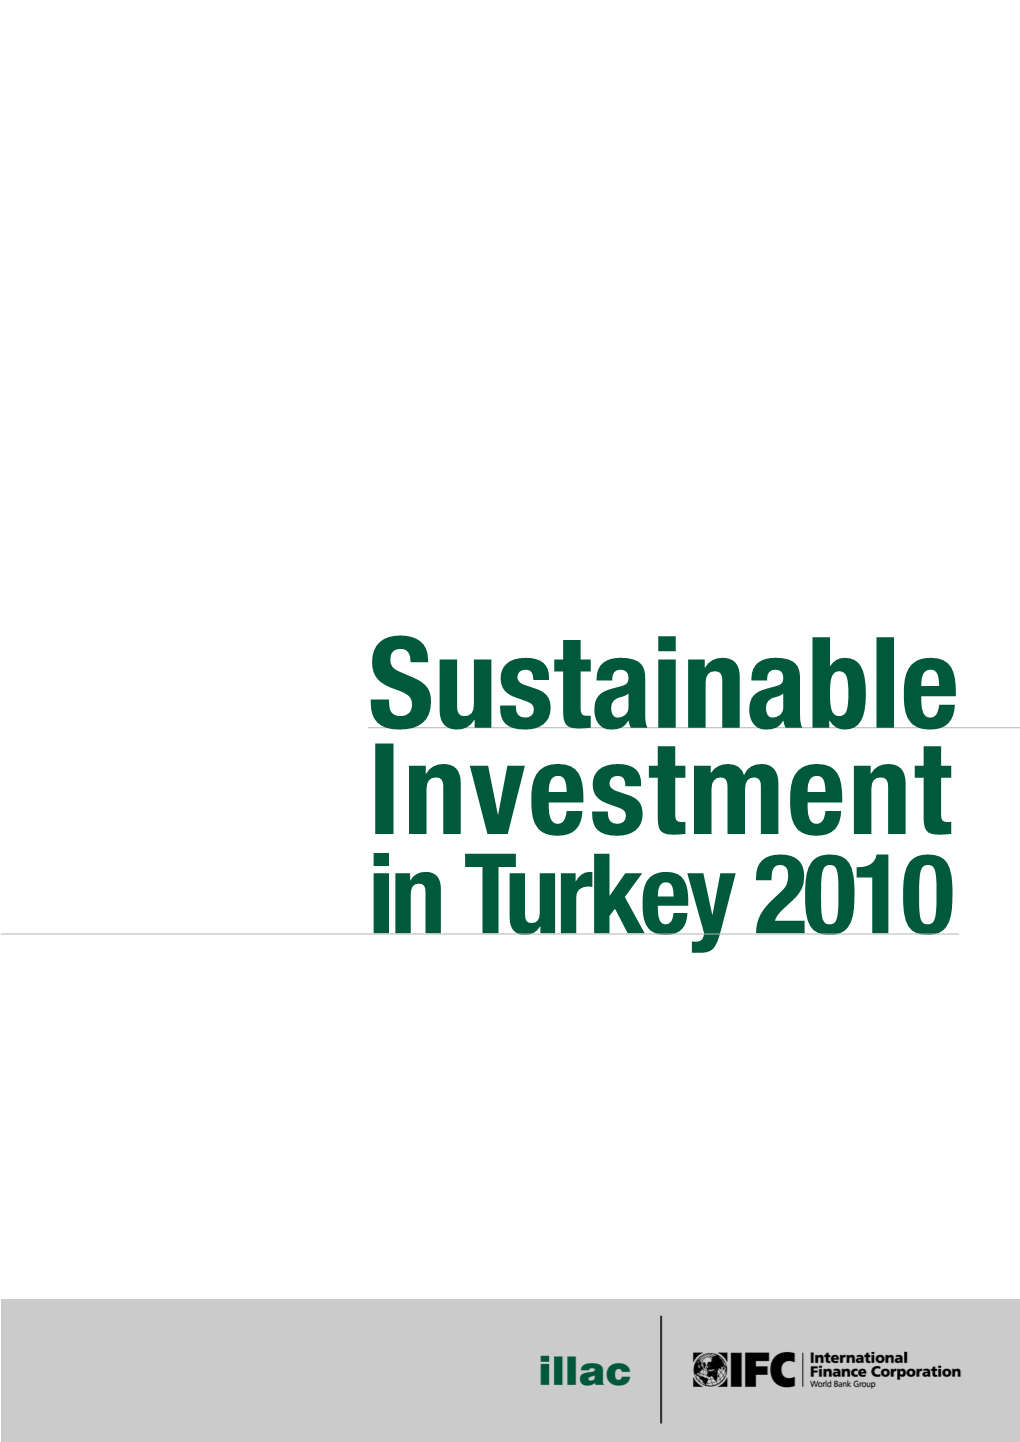 Sustainable Investments in Turkey 2010